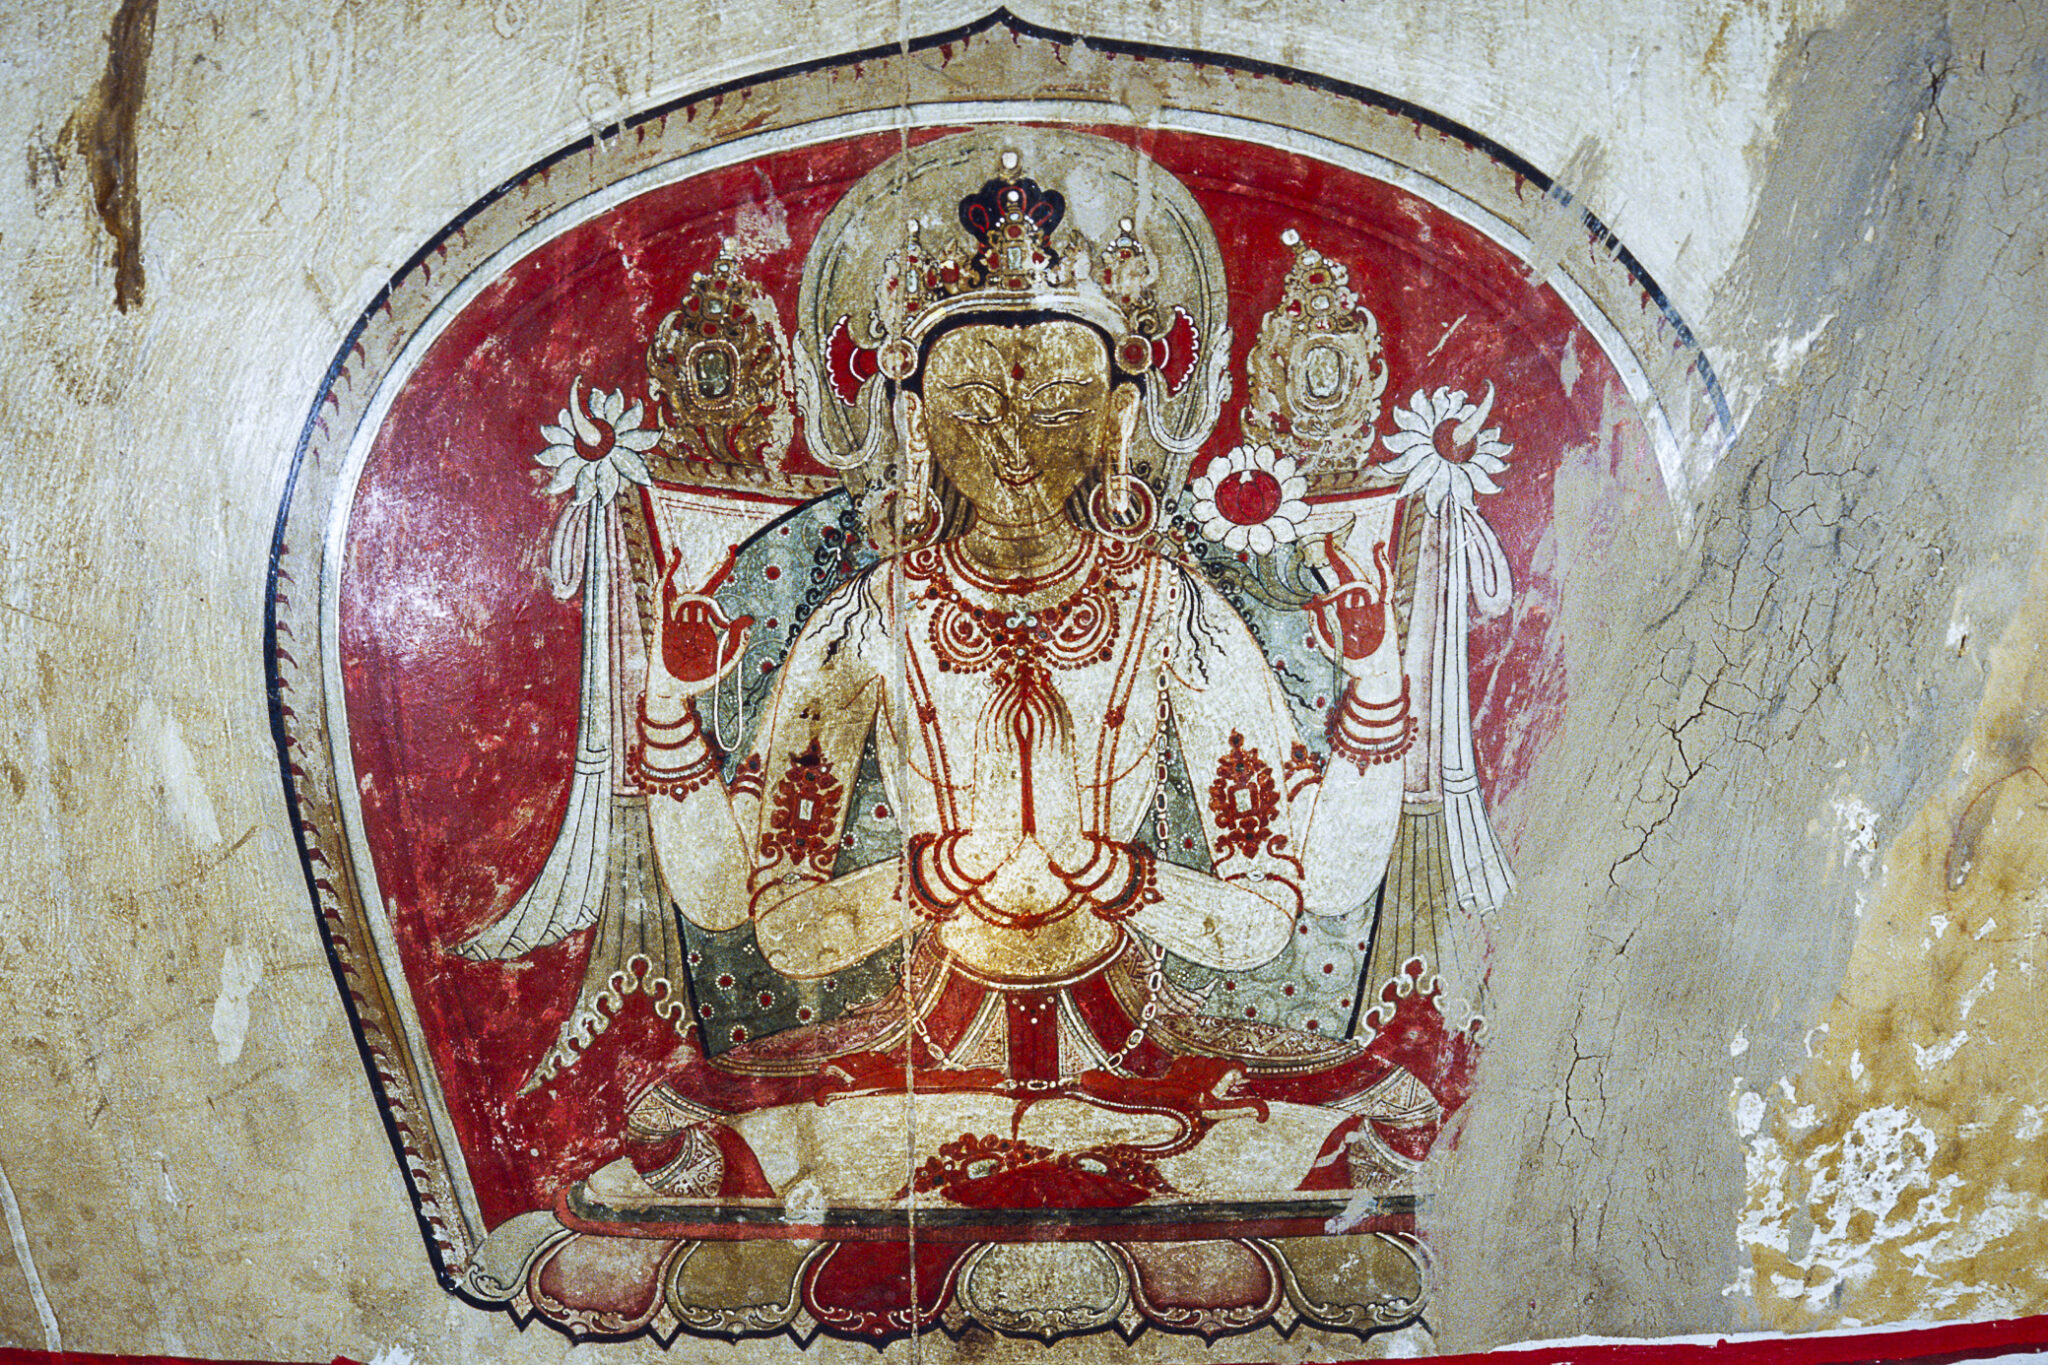 Four-armed Bodhisattva seated on lotus blossom within red pointed nimbus; painted on side of chorten